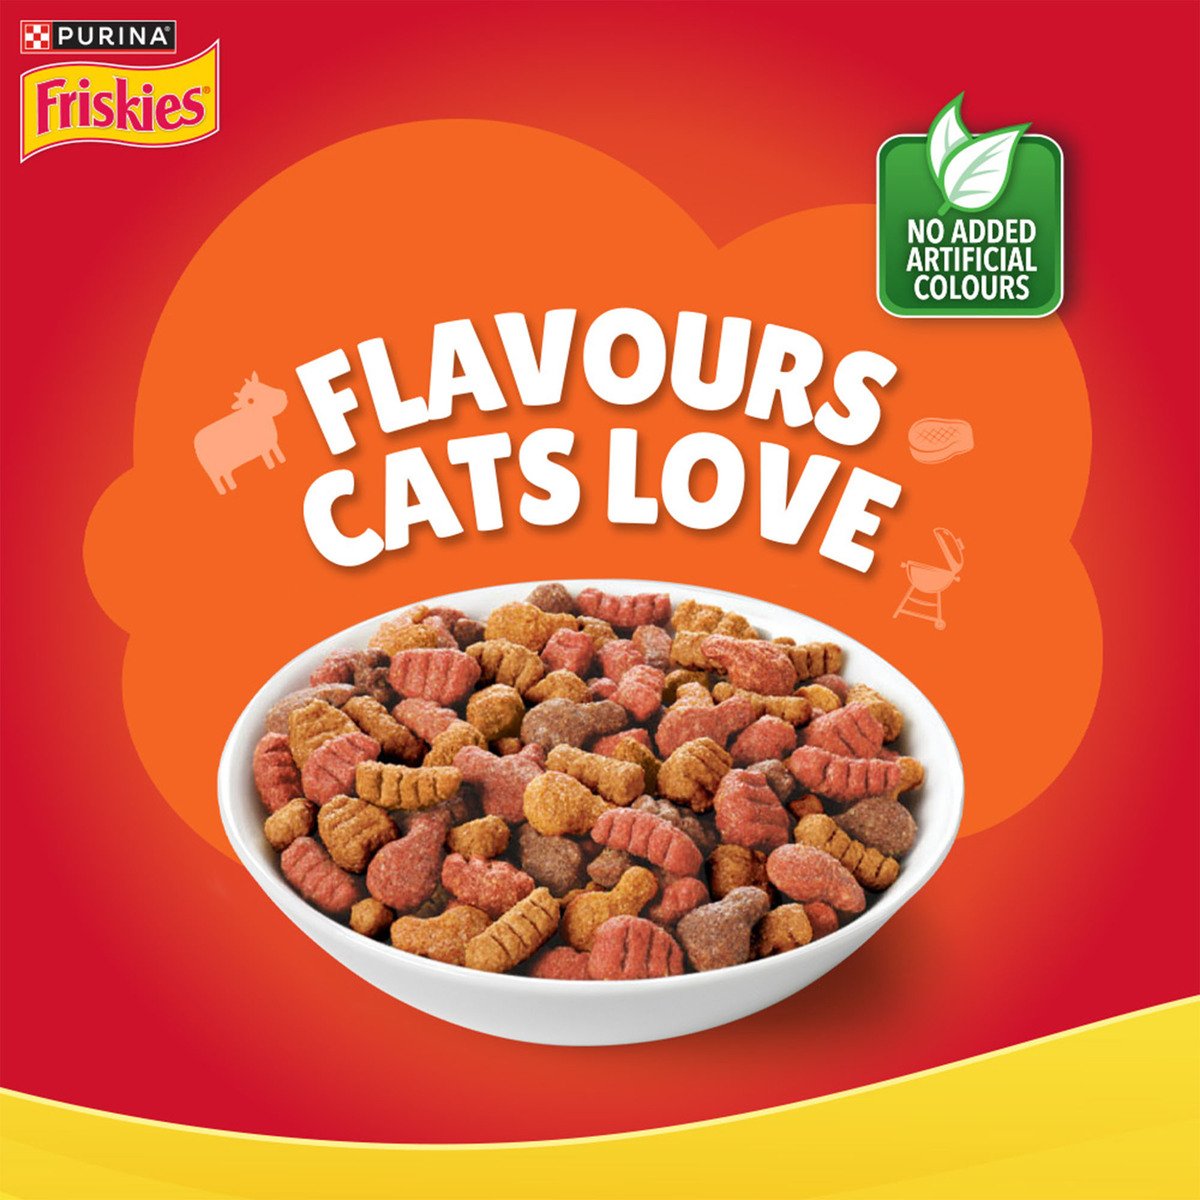 Purina Friskies Meaty Grill Adult Cat Food Value Pack 1 kg